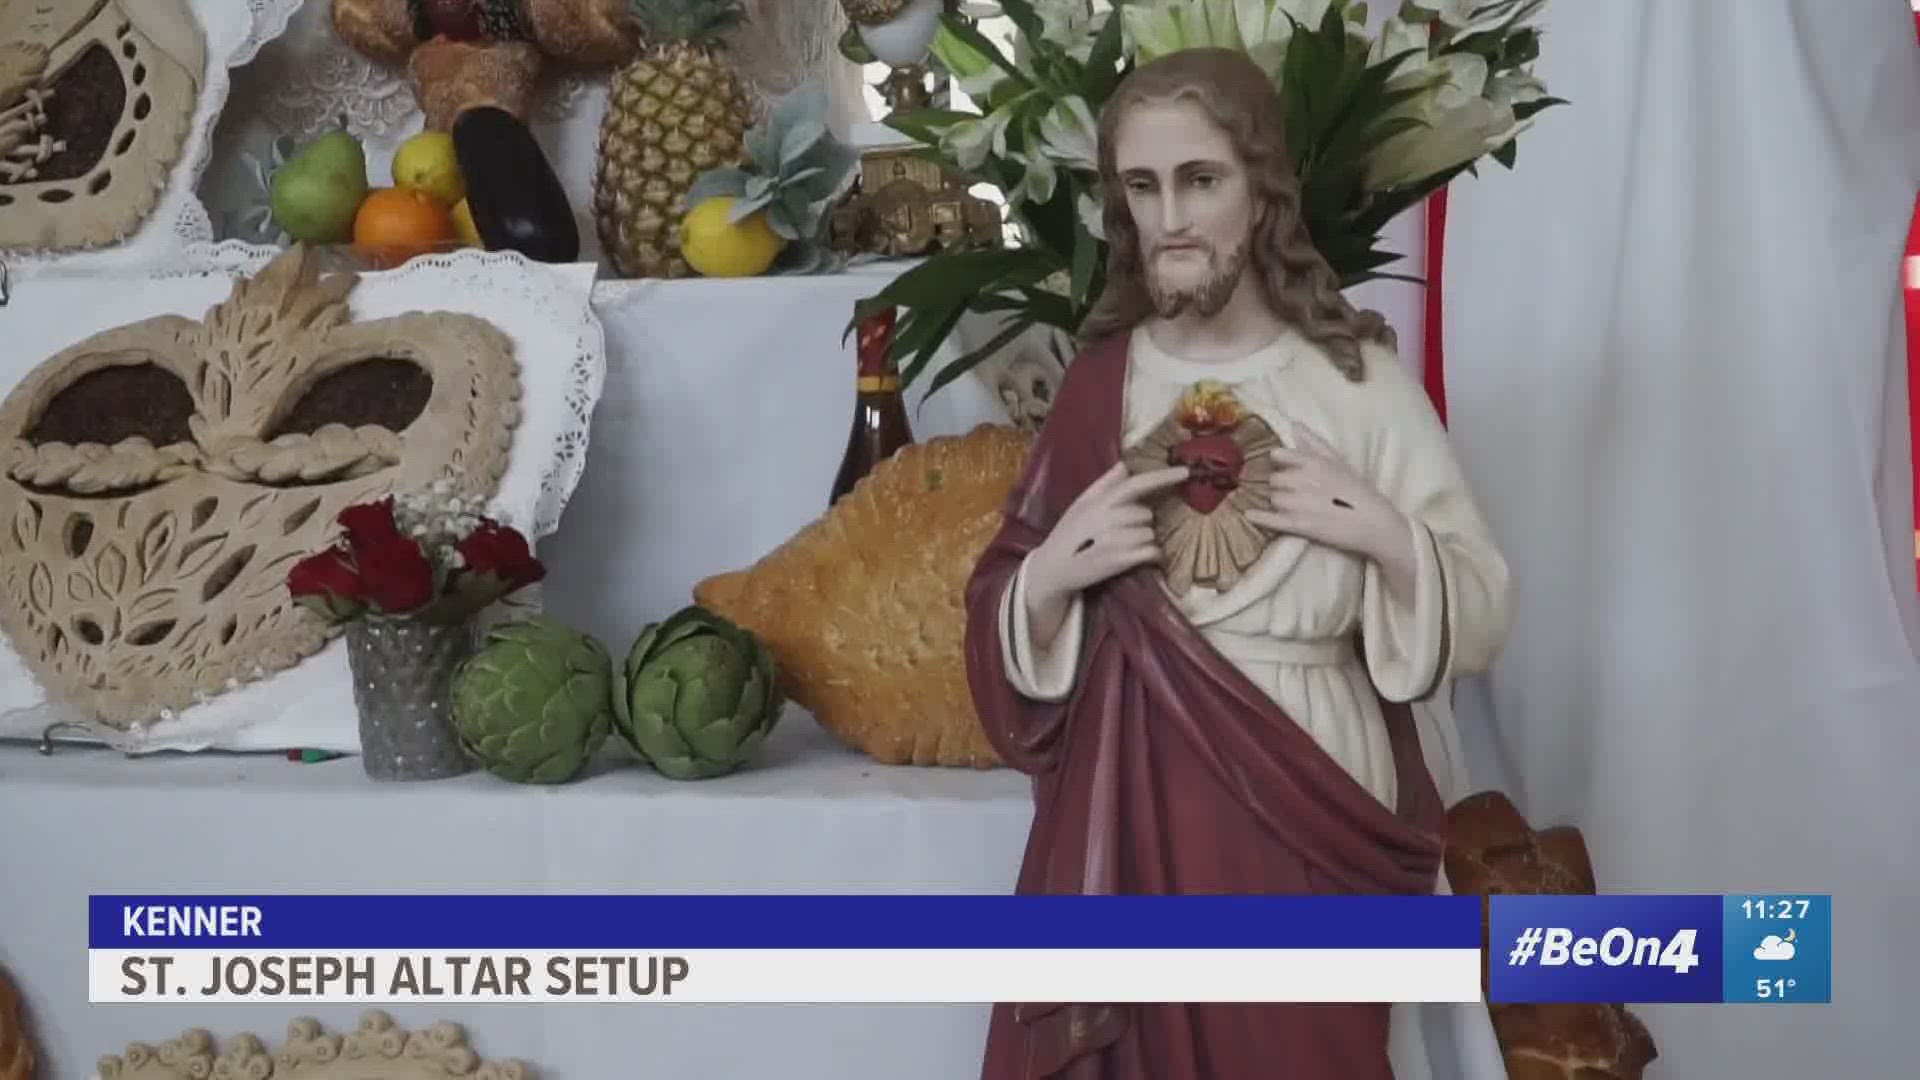 Catholics across our region are setting up the altars and decorating ahead of St. Joseph's Day this weekend. Photojournalist Chris Russell gives us a preview.